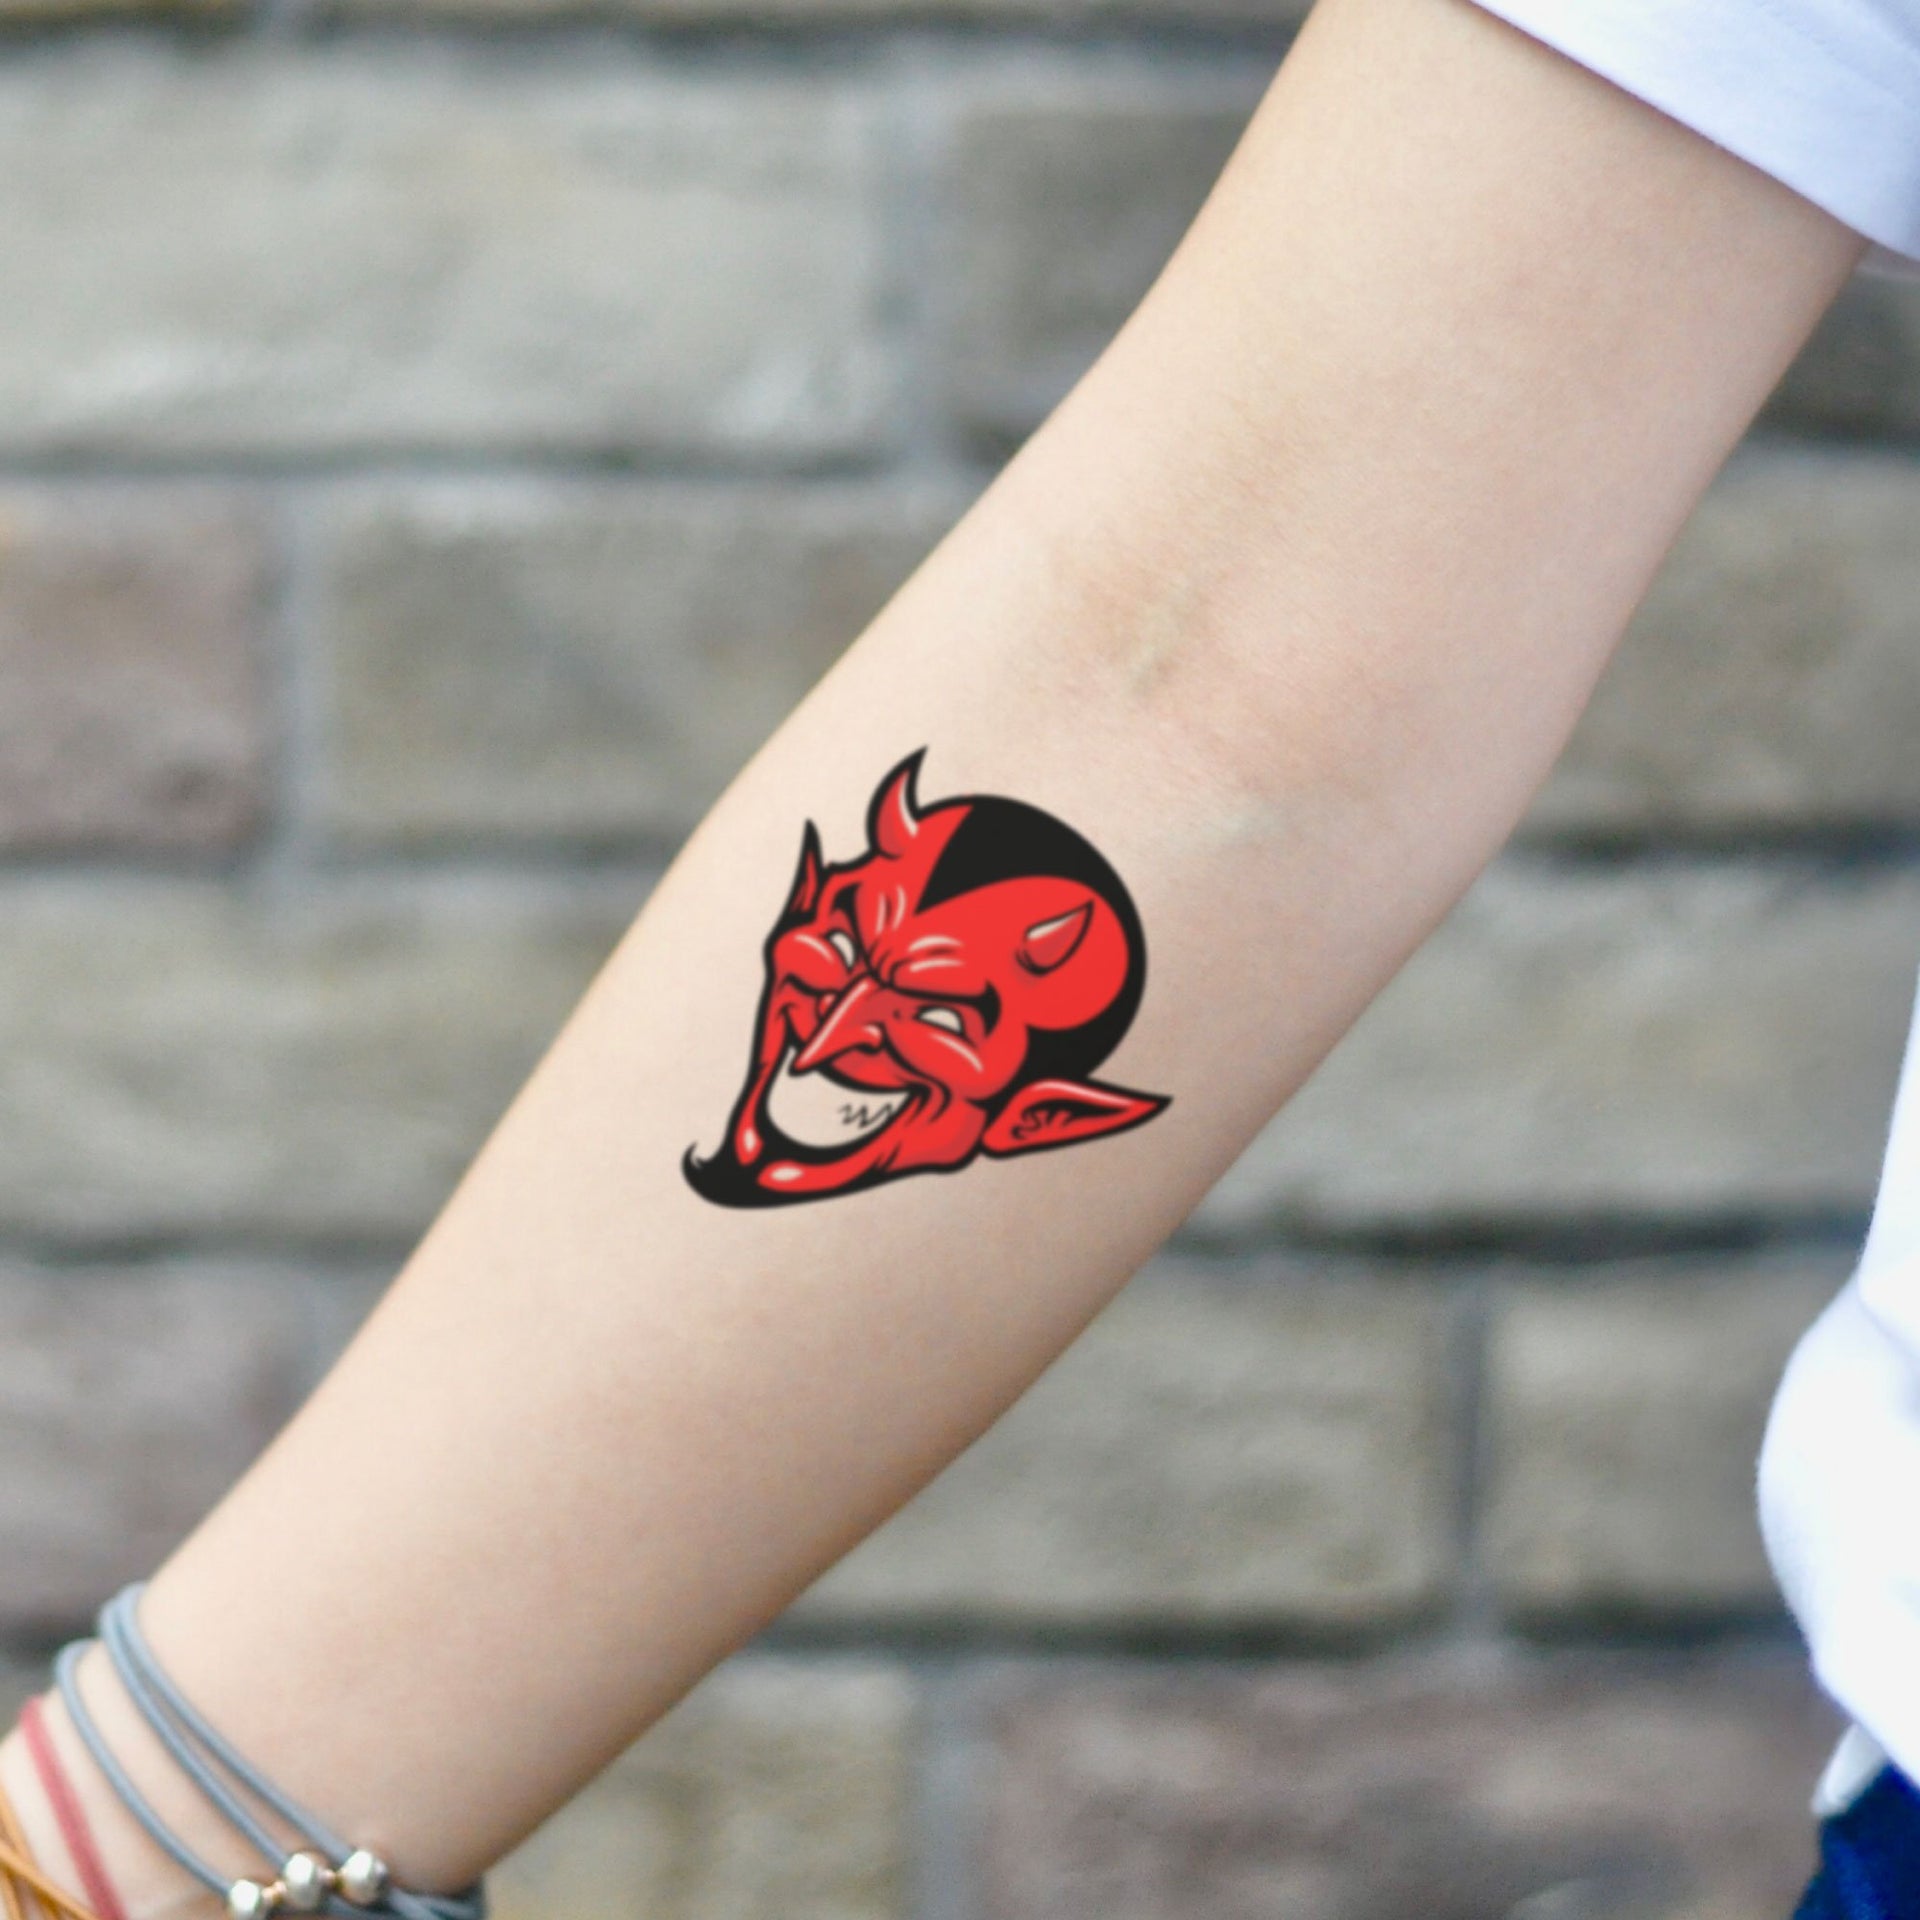 Red Coop Devil Temporary Tattoo Sticker (Set of 2)